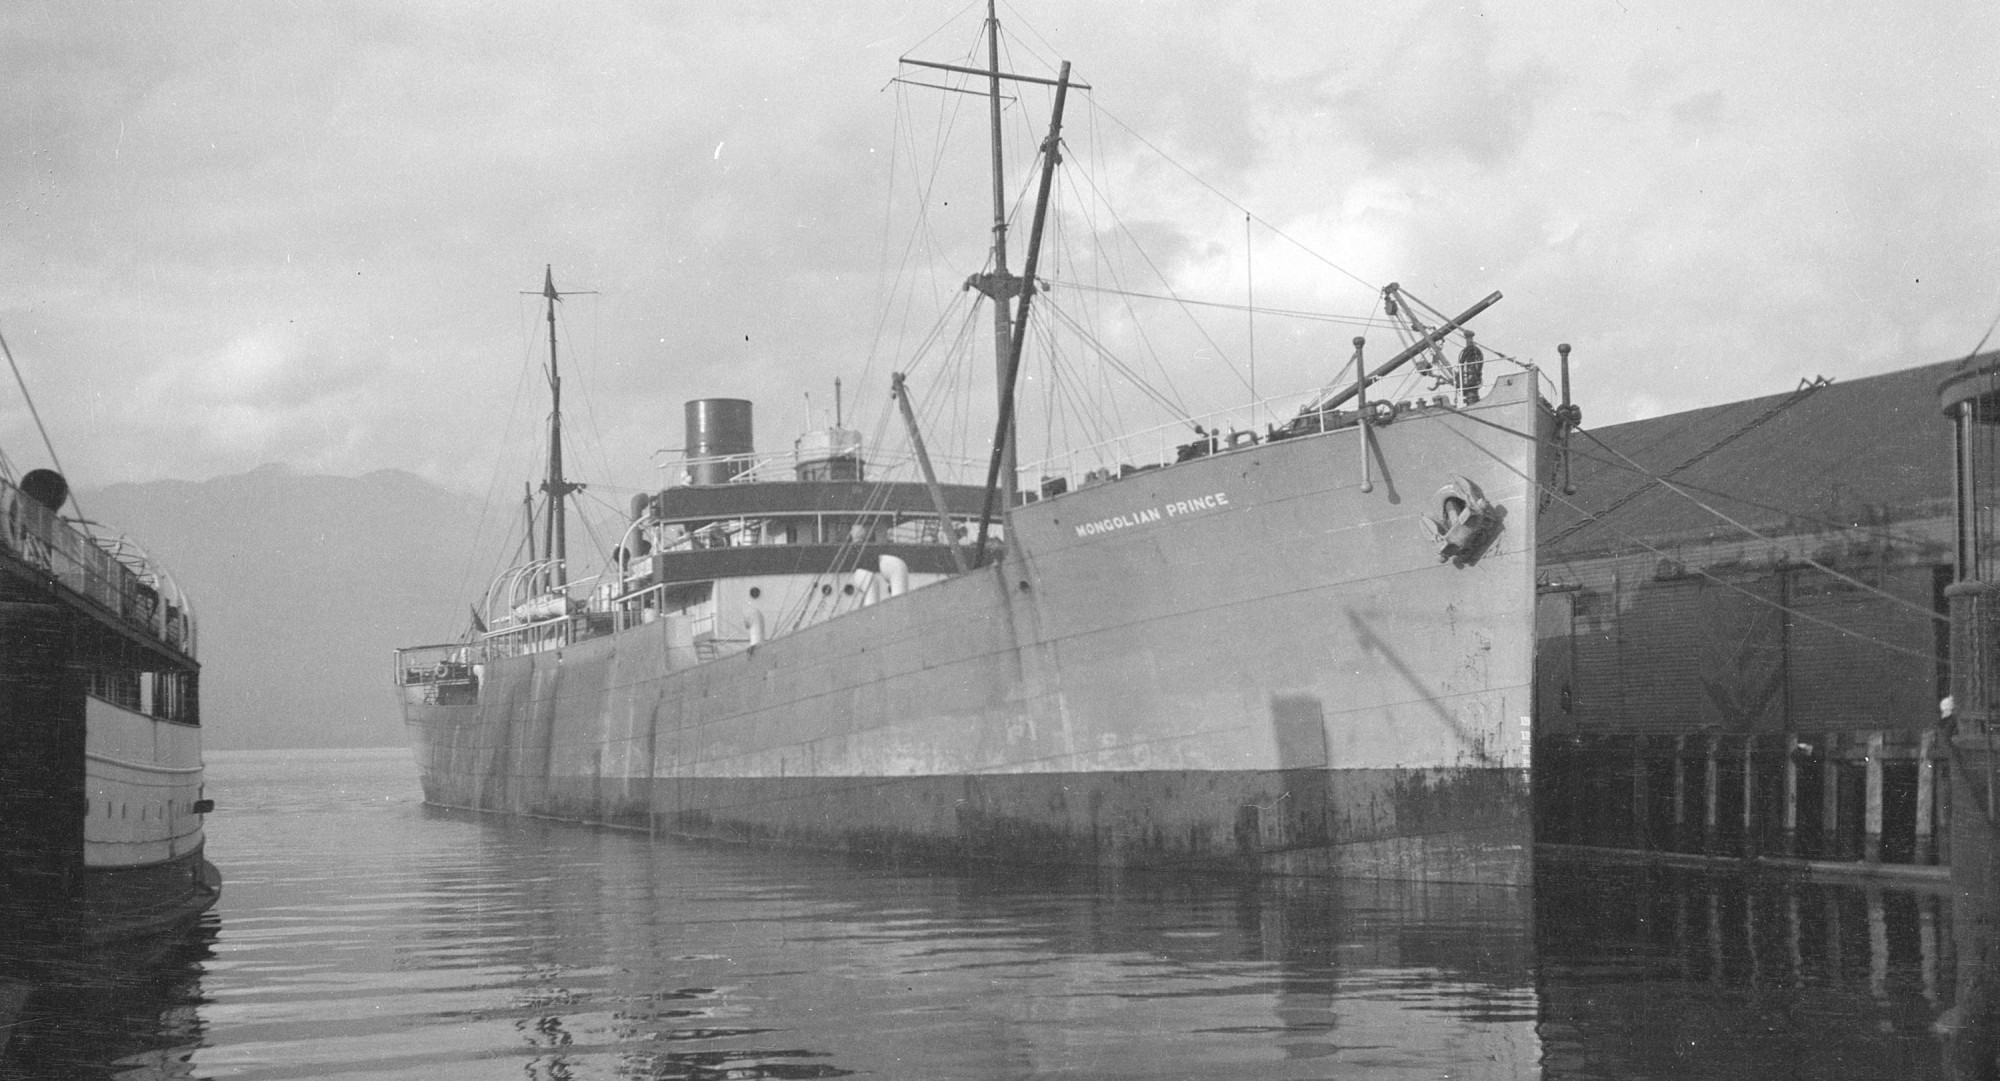 Black and white photograph showing a troopship at dock